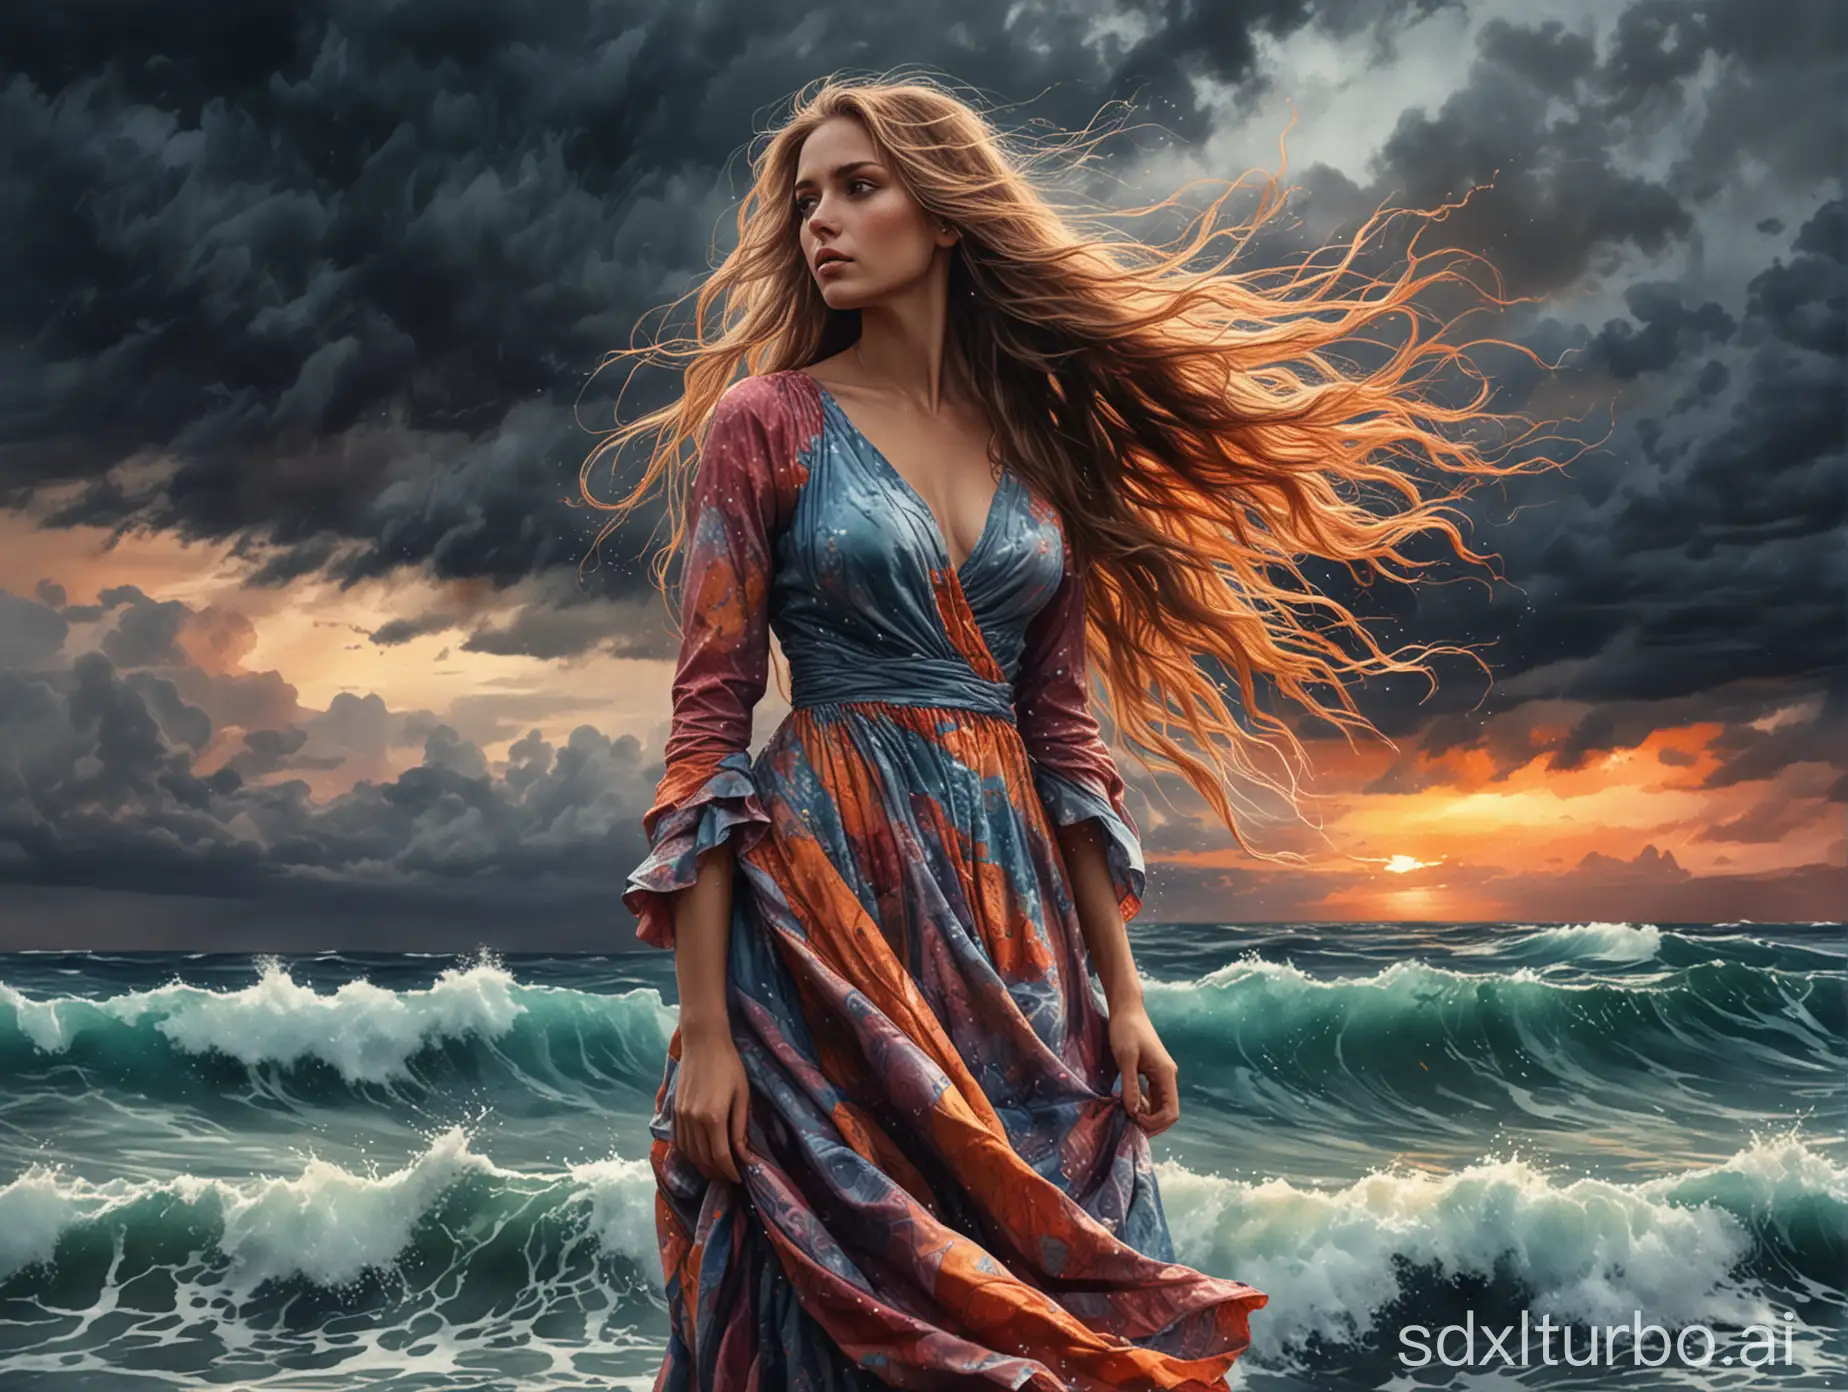 A captivating, vibrant watercolor painting by artist Supersy showcasing a strong, poised woman in an angular side profile. Her long, flowing hair blends into the ocean wave-like fabric of her dress, with striking eyes full of intensity. She stands braving a storm, symbolizing courage and resilience, in a cinematic, 3D render rich with color splashes, against a dramatic sky with dark clouds and a vibrant sunset.